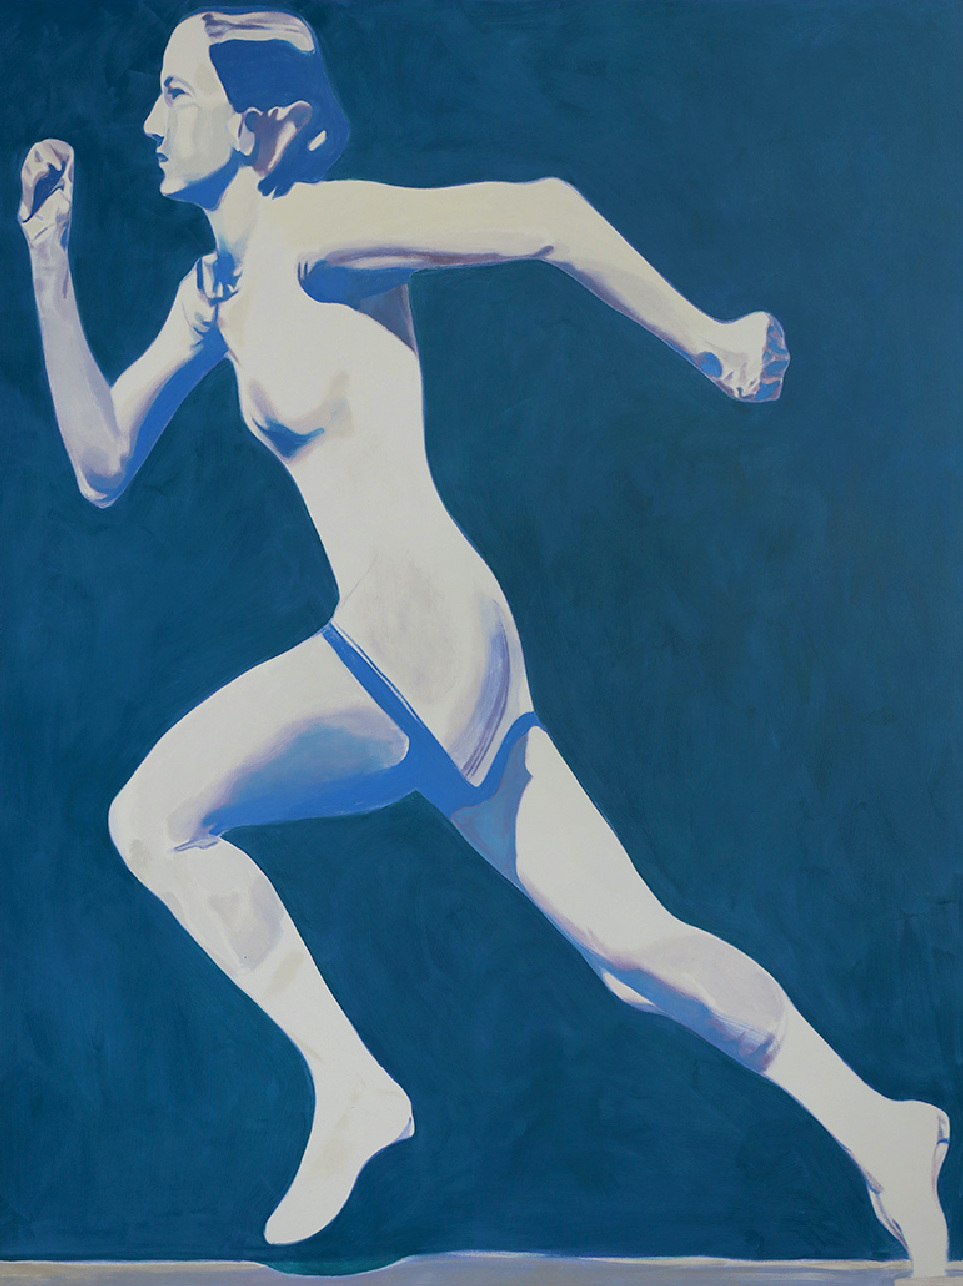 Colm Mac Athlaoich: Sprinting woman right to left, oil on canvas, 200 x 150cm; © the artist, courtesy Grove Berlin | The Art of Sport | Saturday 12 August – Sunday 8 October 2023 | Butler Gallery | Image: Colm Mac Athlaoich: Sprinting woman right to left, oil on canvas, 200 x 150cm; © the artist, courtesy Grove Berlin – paintings in shades of blue / cyan + white; the woman depicted takes up the whole canvas; clad in older-style athletic gear, she is headed across towards the left edge of the canvas 